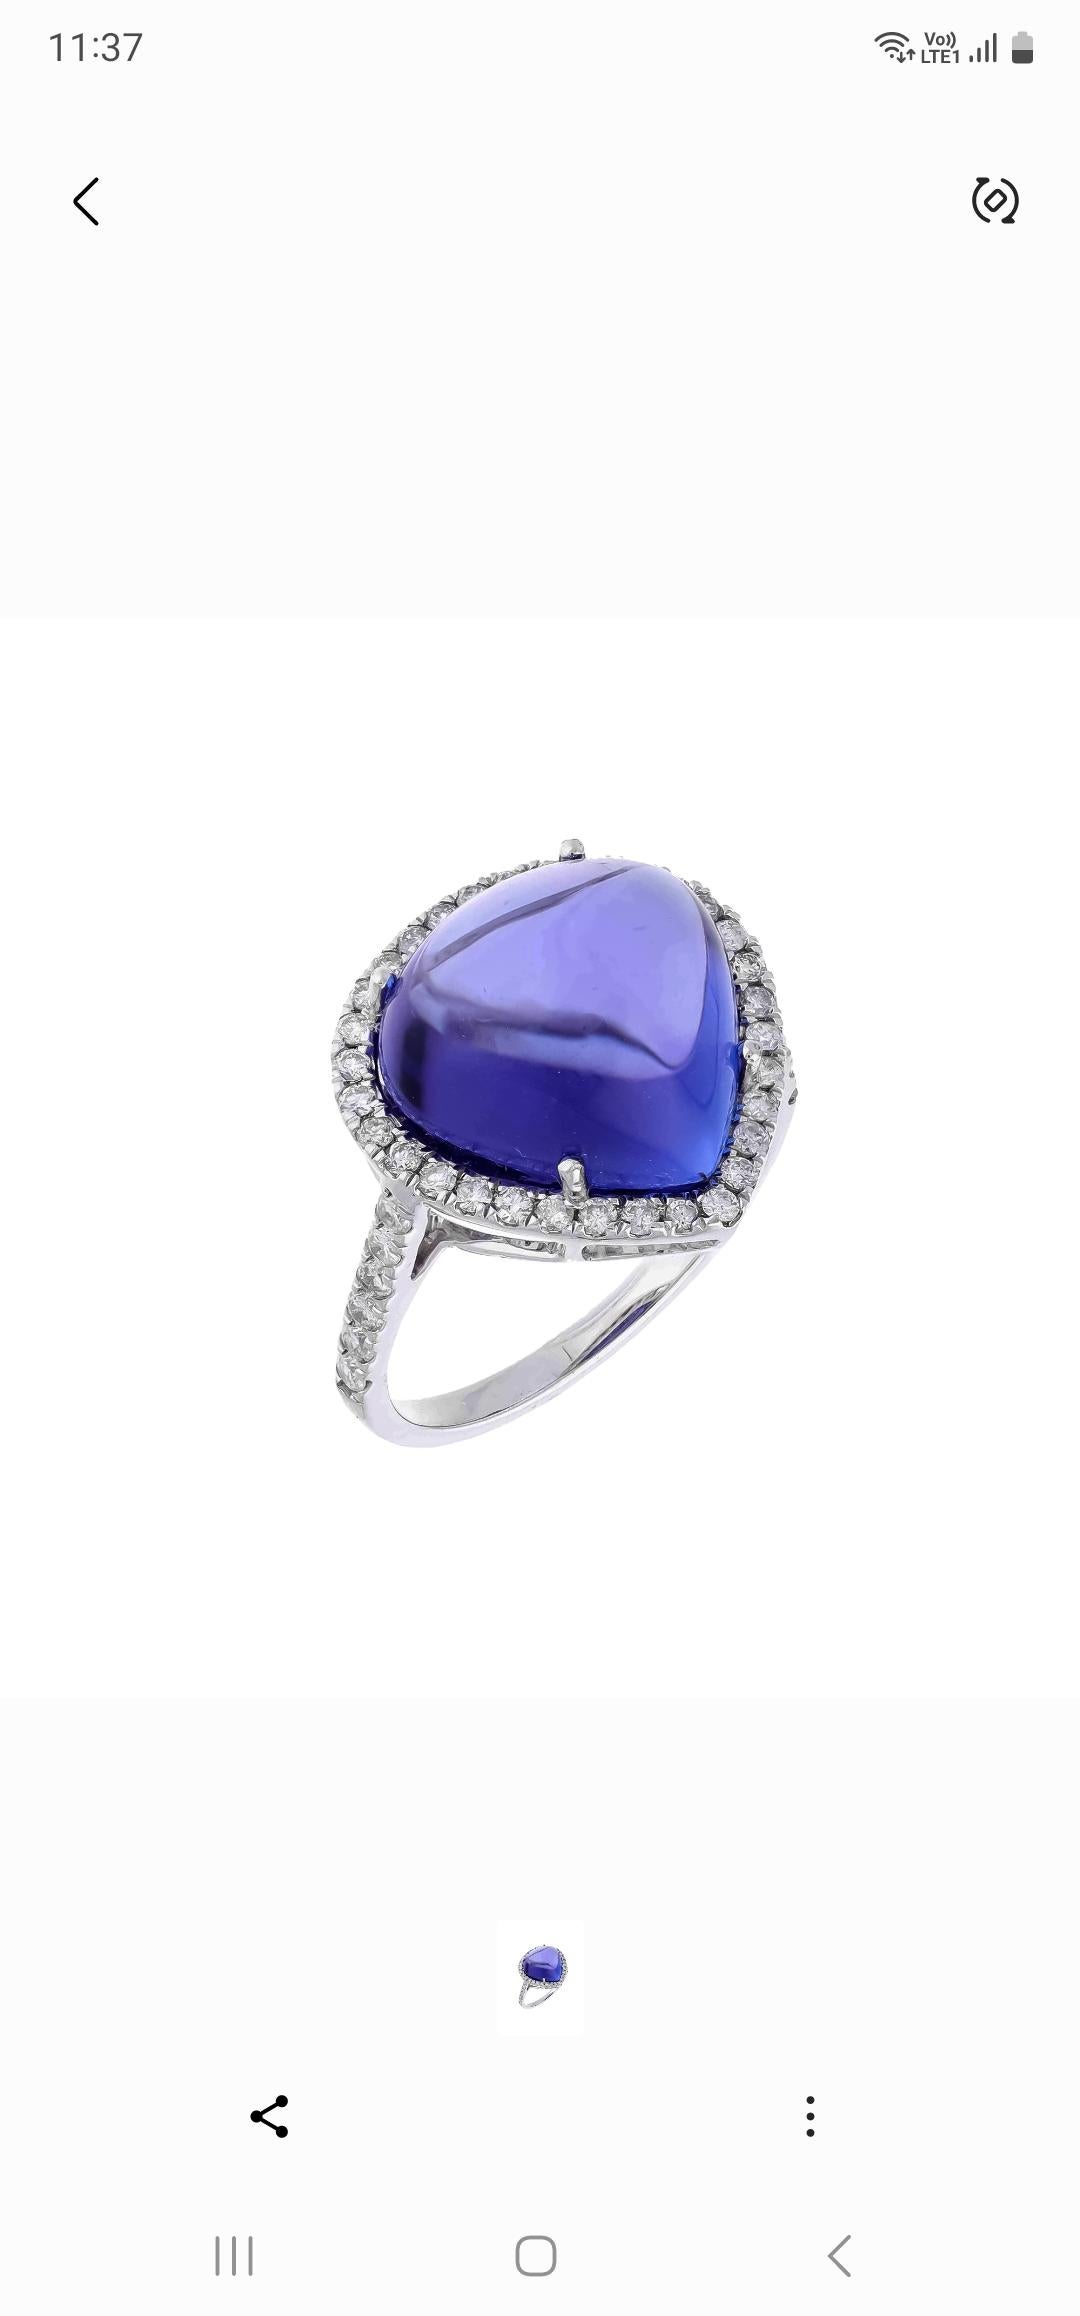 This extraordinary large Cabochon of 10.10 carat tanzanite is a true gemstone that is highly treasured. It is surrounded by a total of 0.40 carats of shimmering white diamonds, which adds to the overall beauty and elegance of the piece. The oval-cut